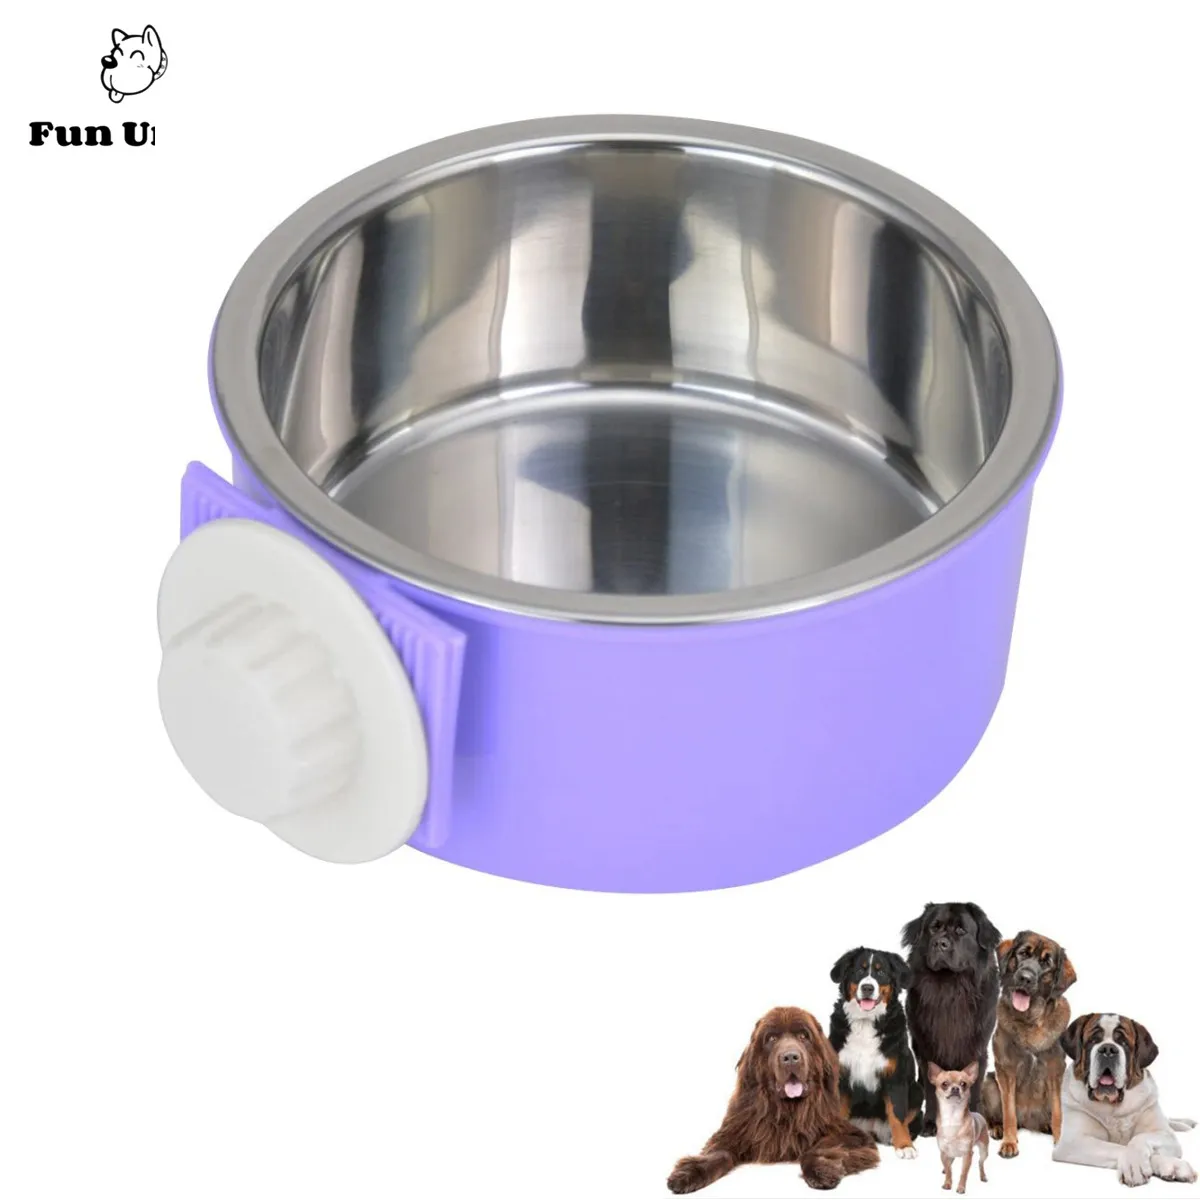 

Crate Dog Bowl Removable Stainless Steel Water Food Feeder Bowls Cage Coop Cup for Cat Puppy Bird Pets